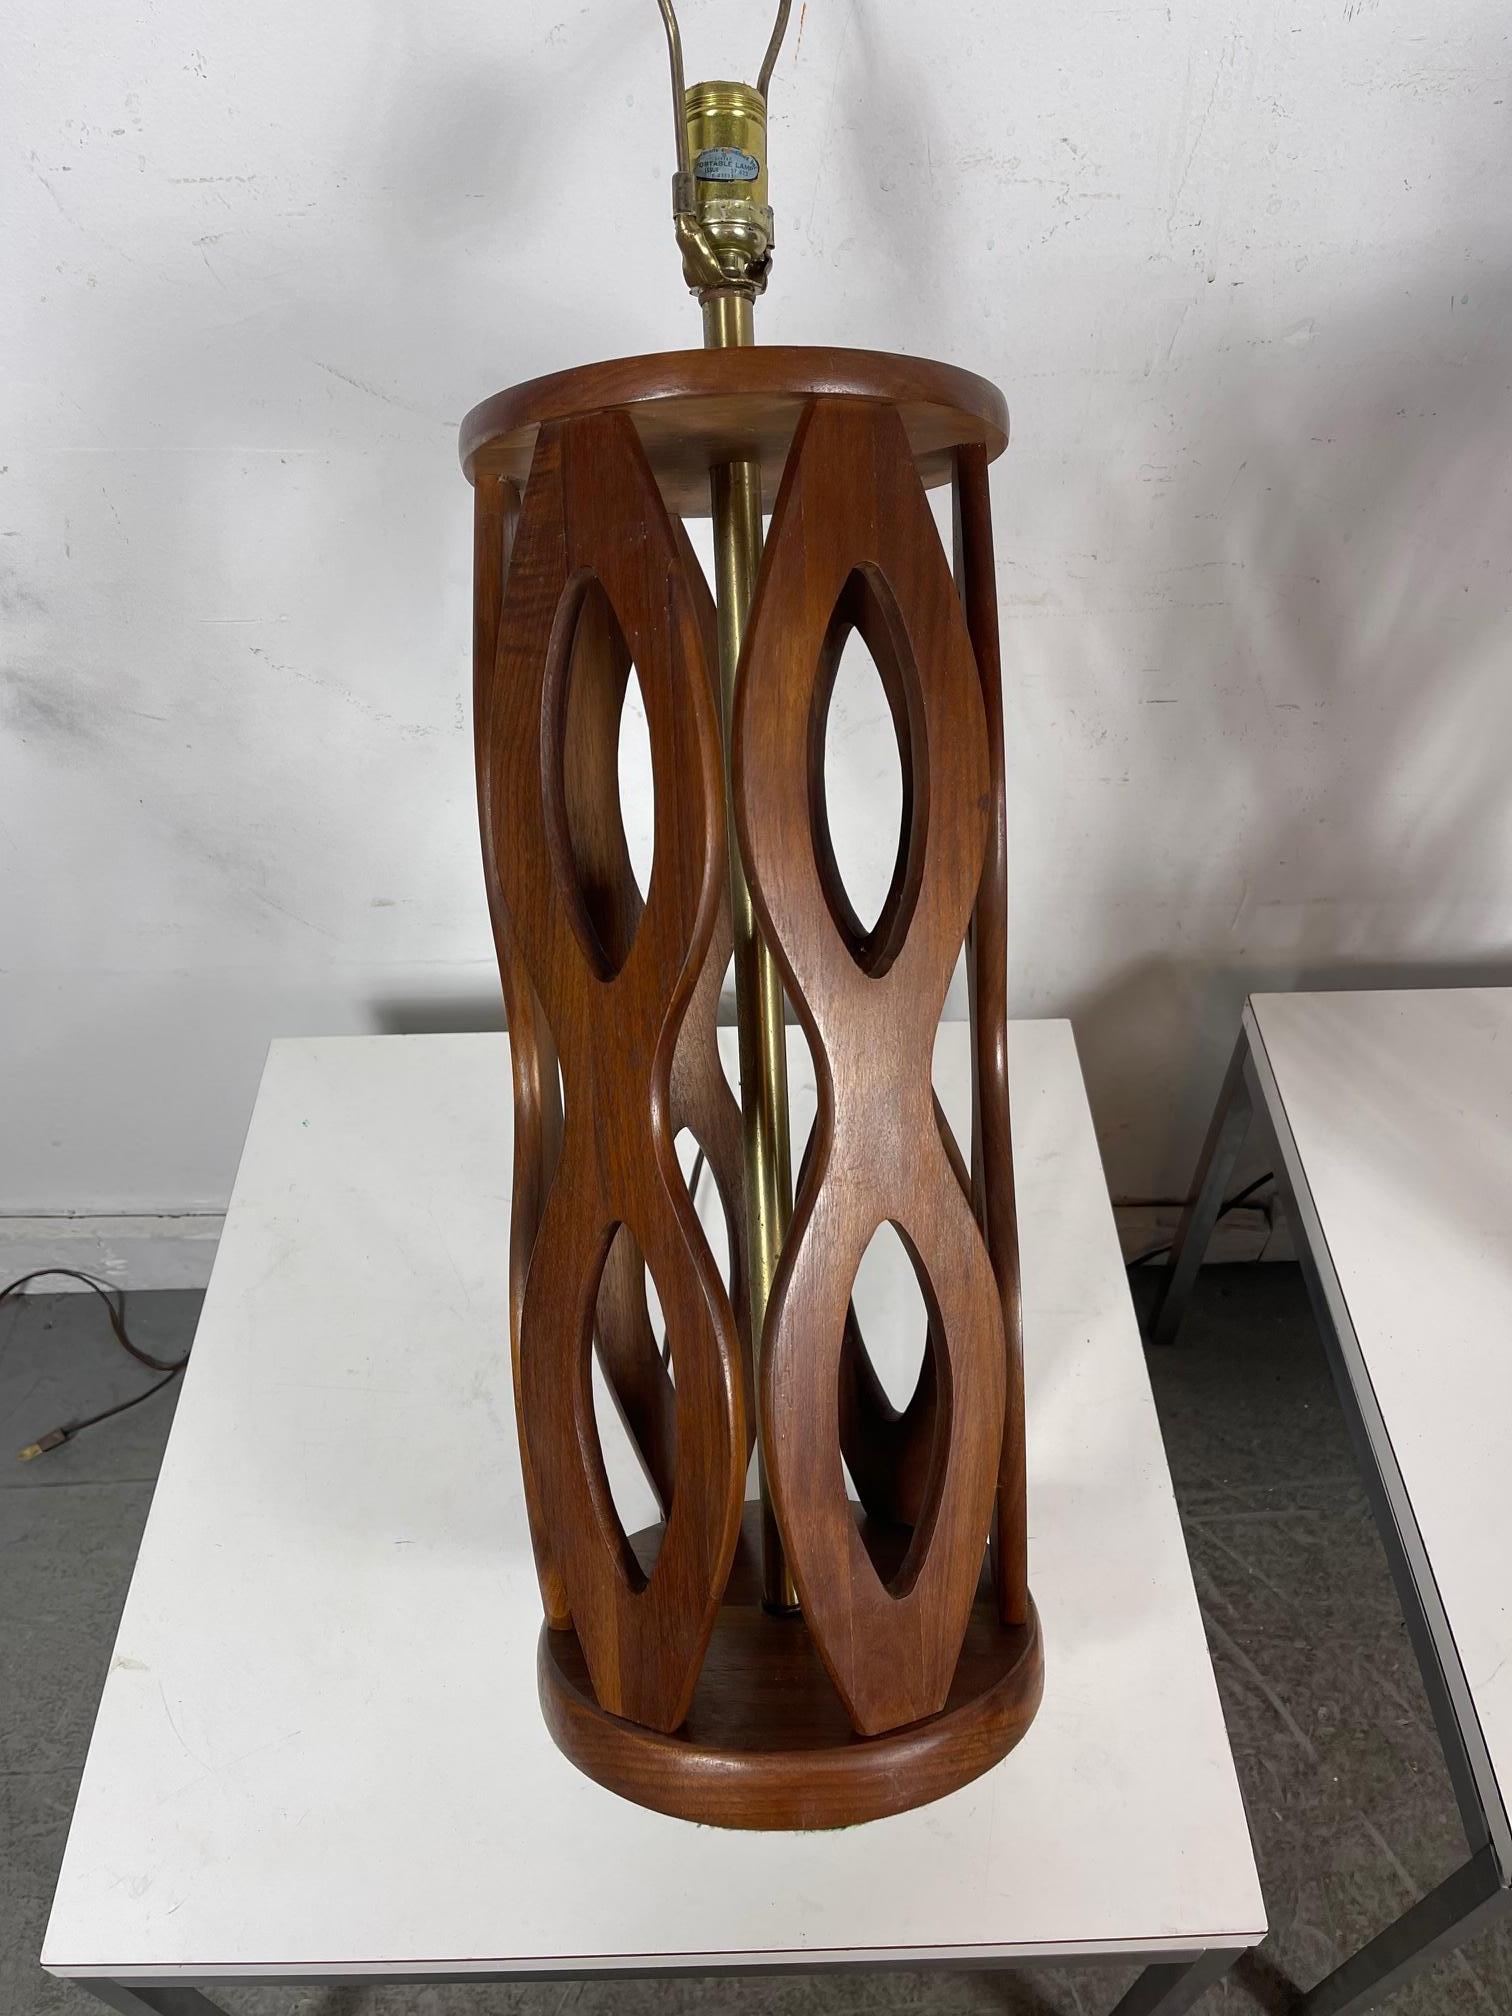 Classic Pair Sculpted Walnut Mid Century Modern Table Lamps by Modeline Lamp Co. In Good Condition For Sale In Buffalo, NY